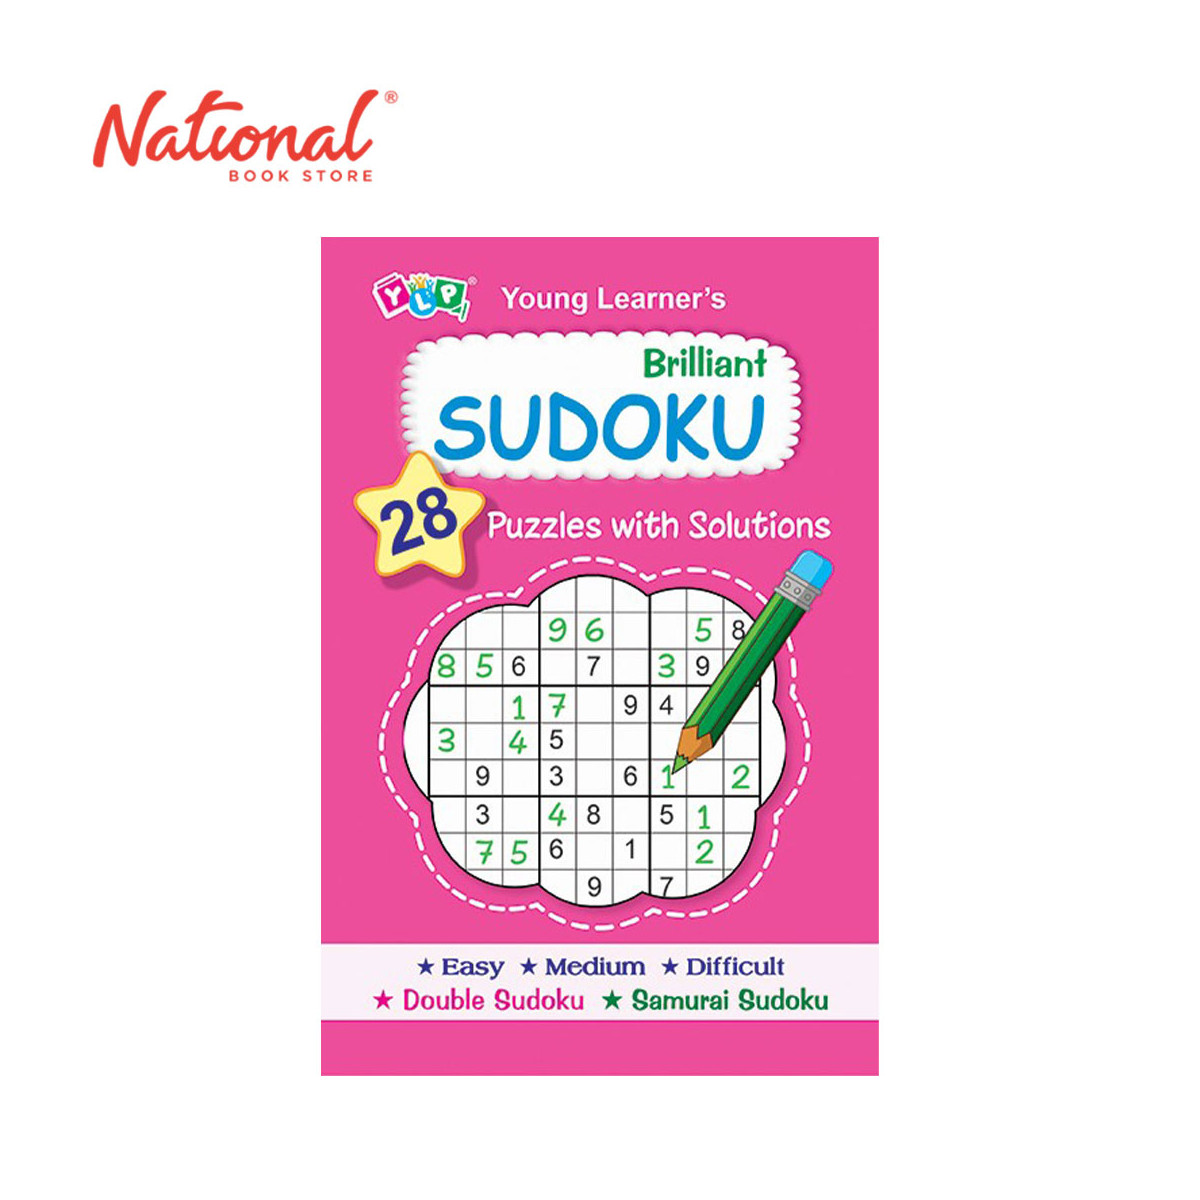 Young Learner's: Brilliant Sudoku - Trade Paperback - Hobbies for Kids - Puzzles for Kids